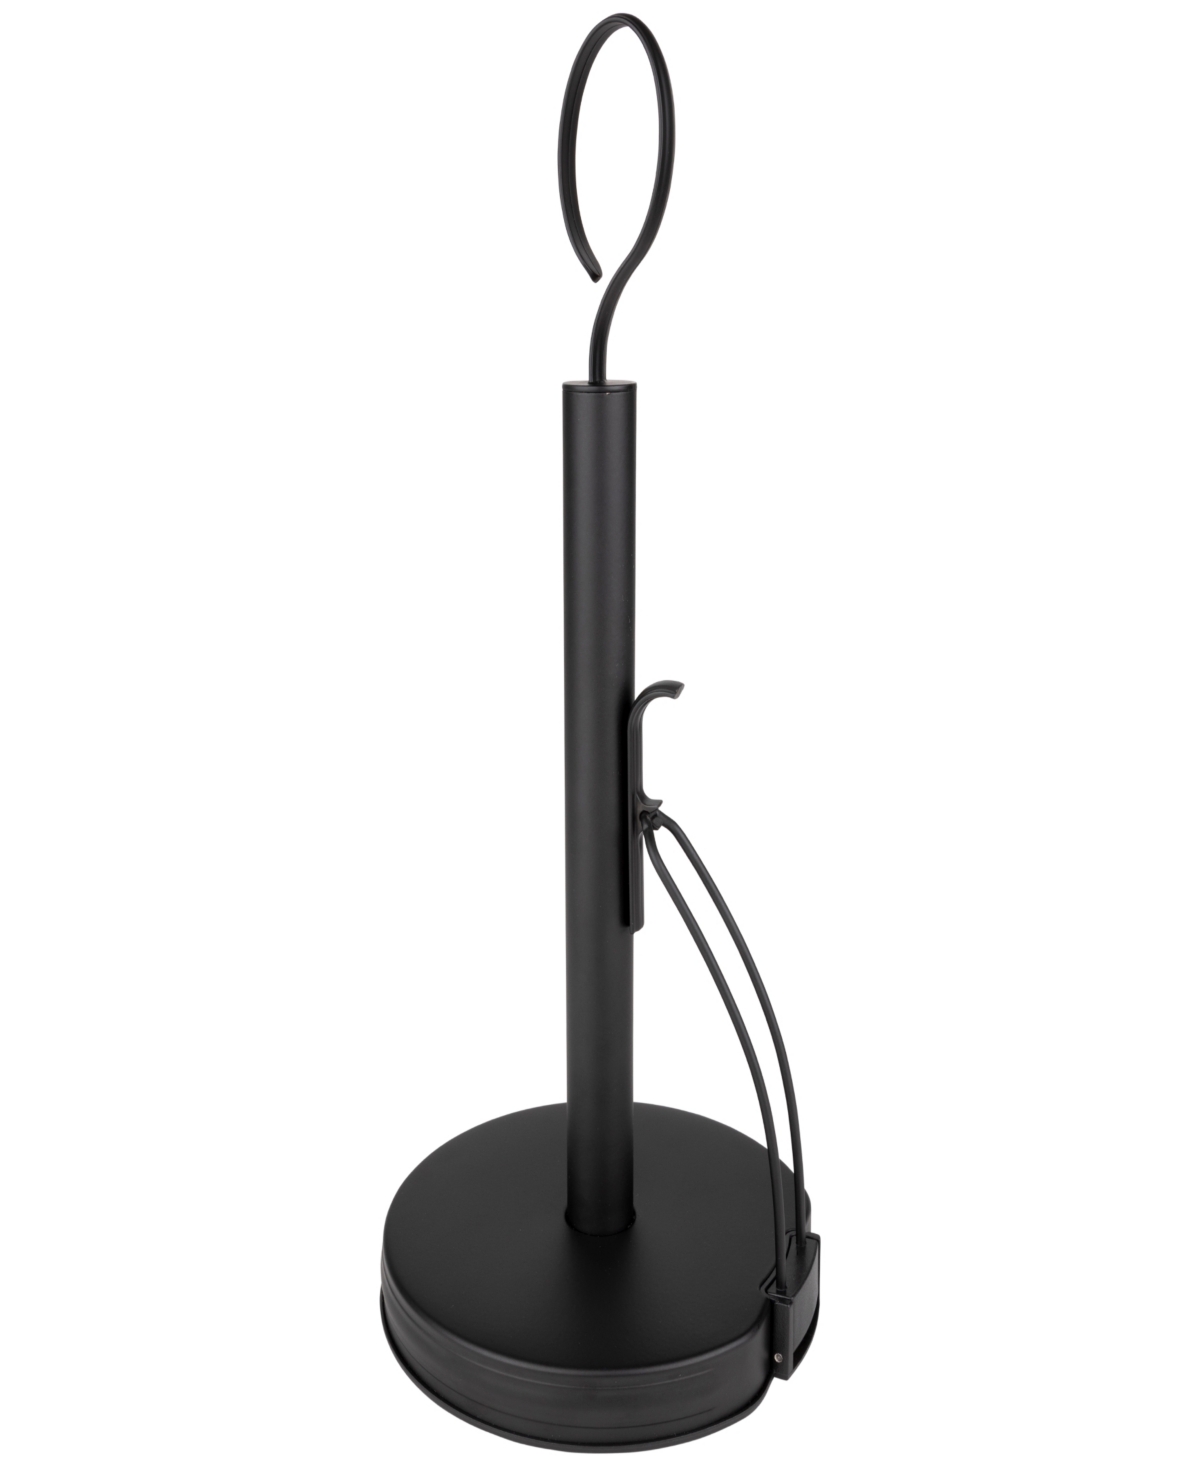 Kitchen Details Paper Towel Holder with Deluxe Tension Arm in Black